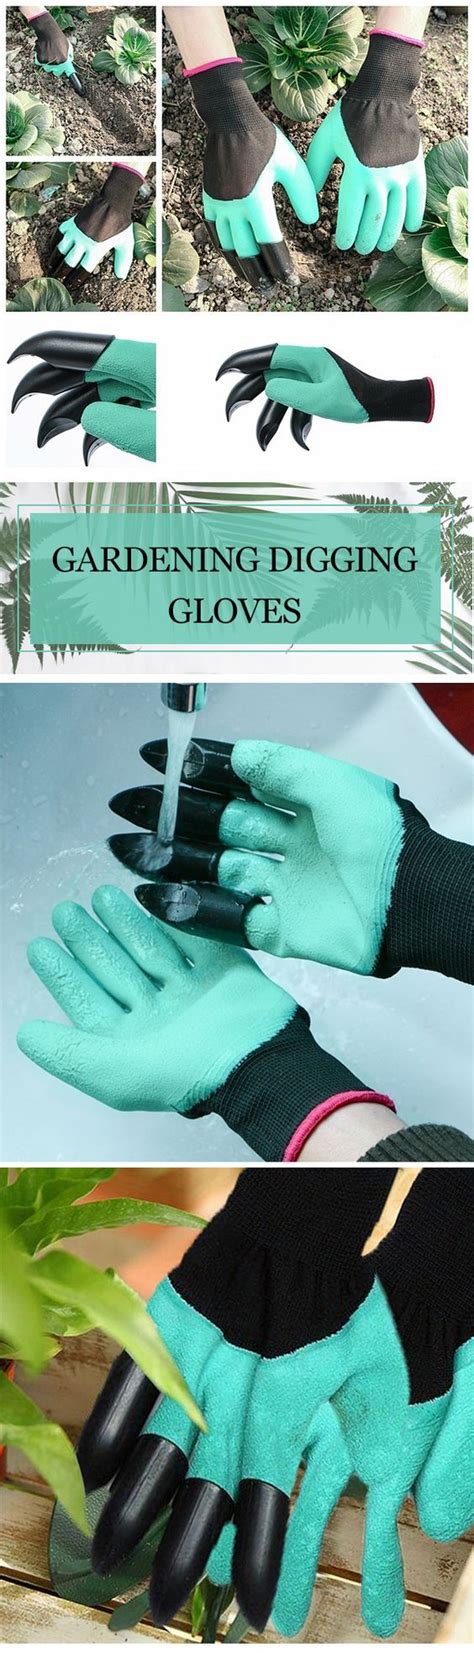 These Garden Gloves With Claws Let You Dig And Plant Without Hand Tools